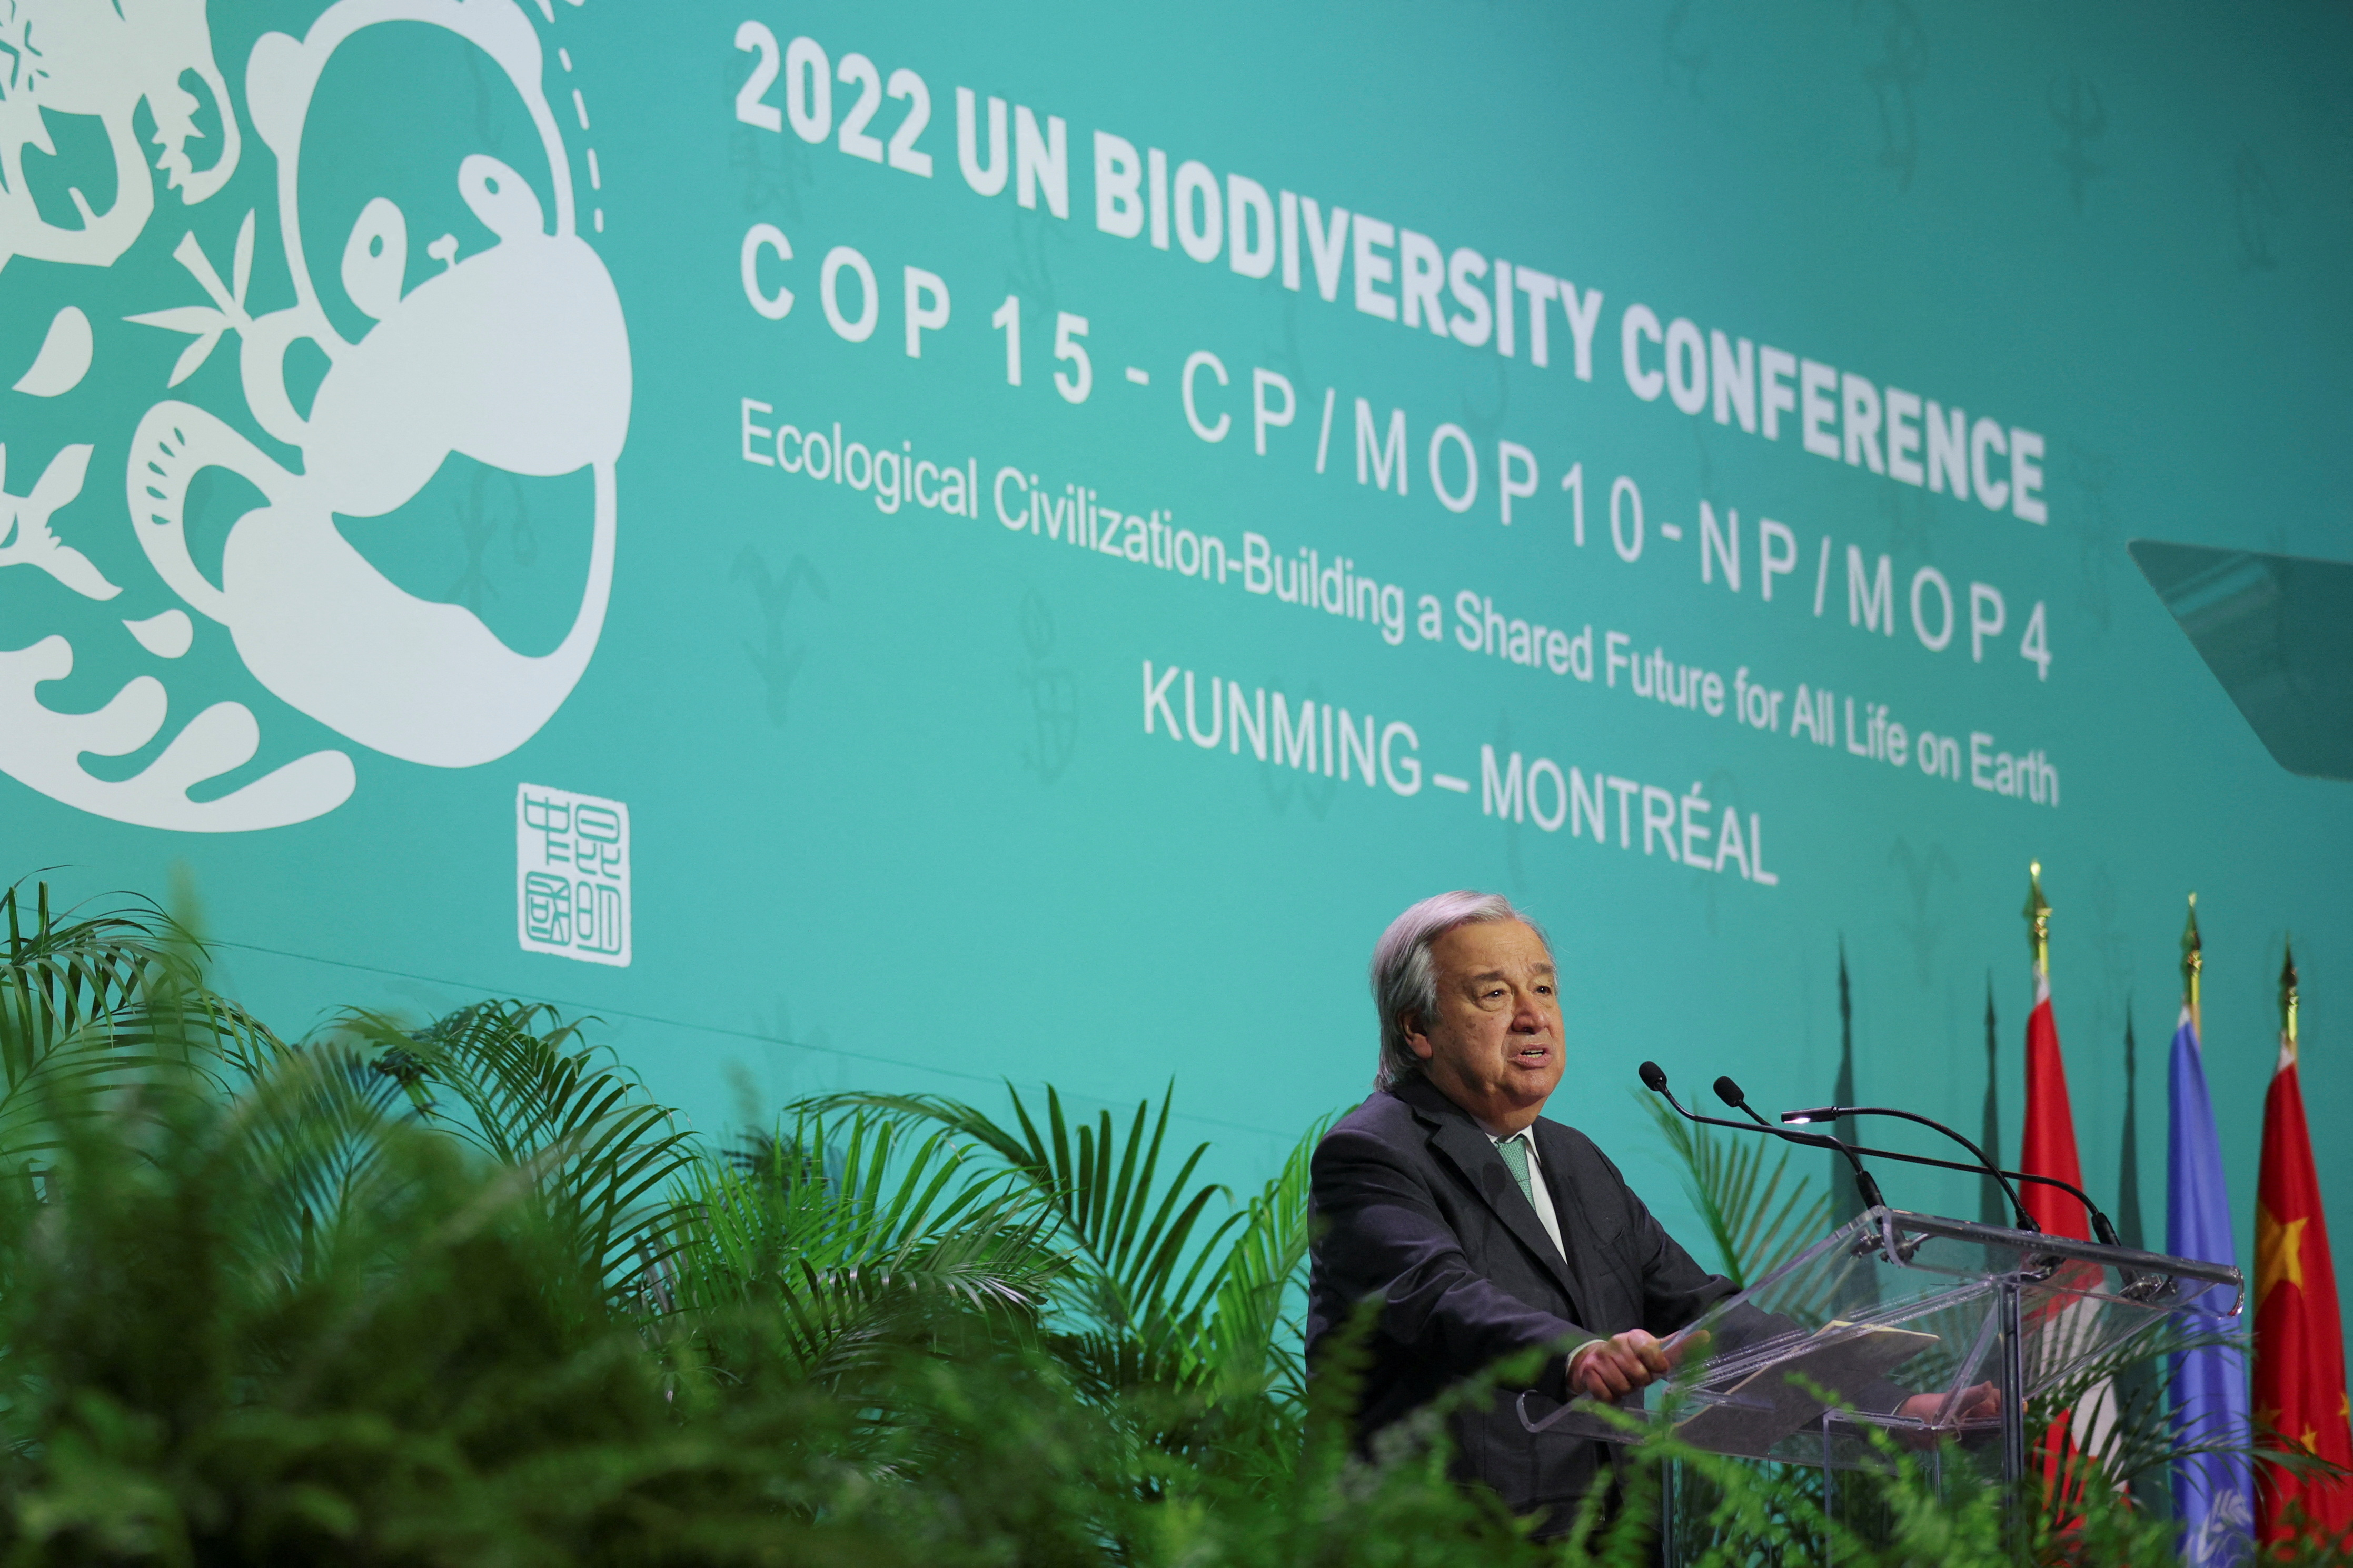 Opening of COP15 in Montreal